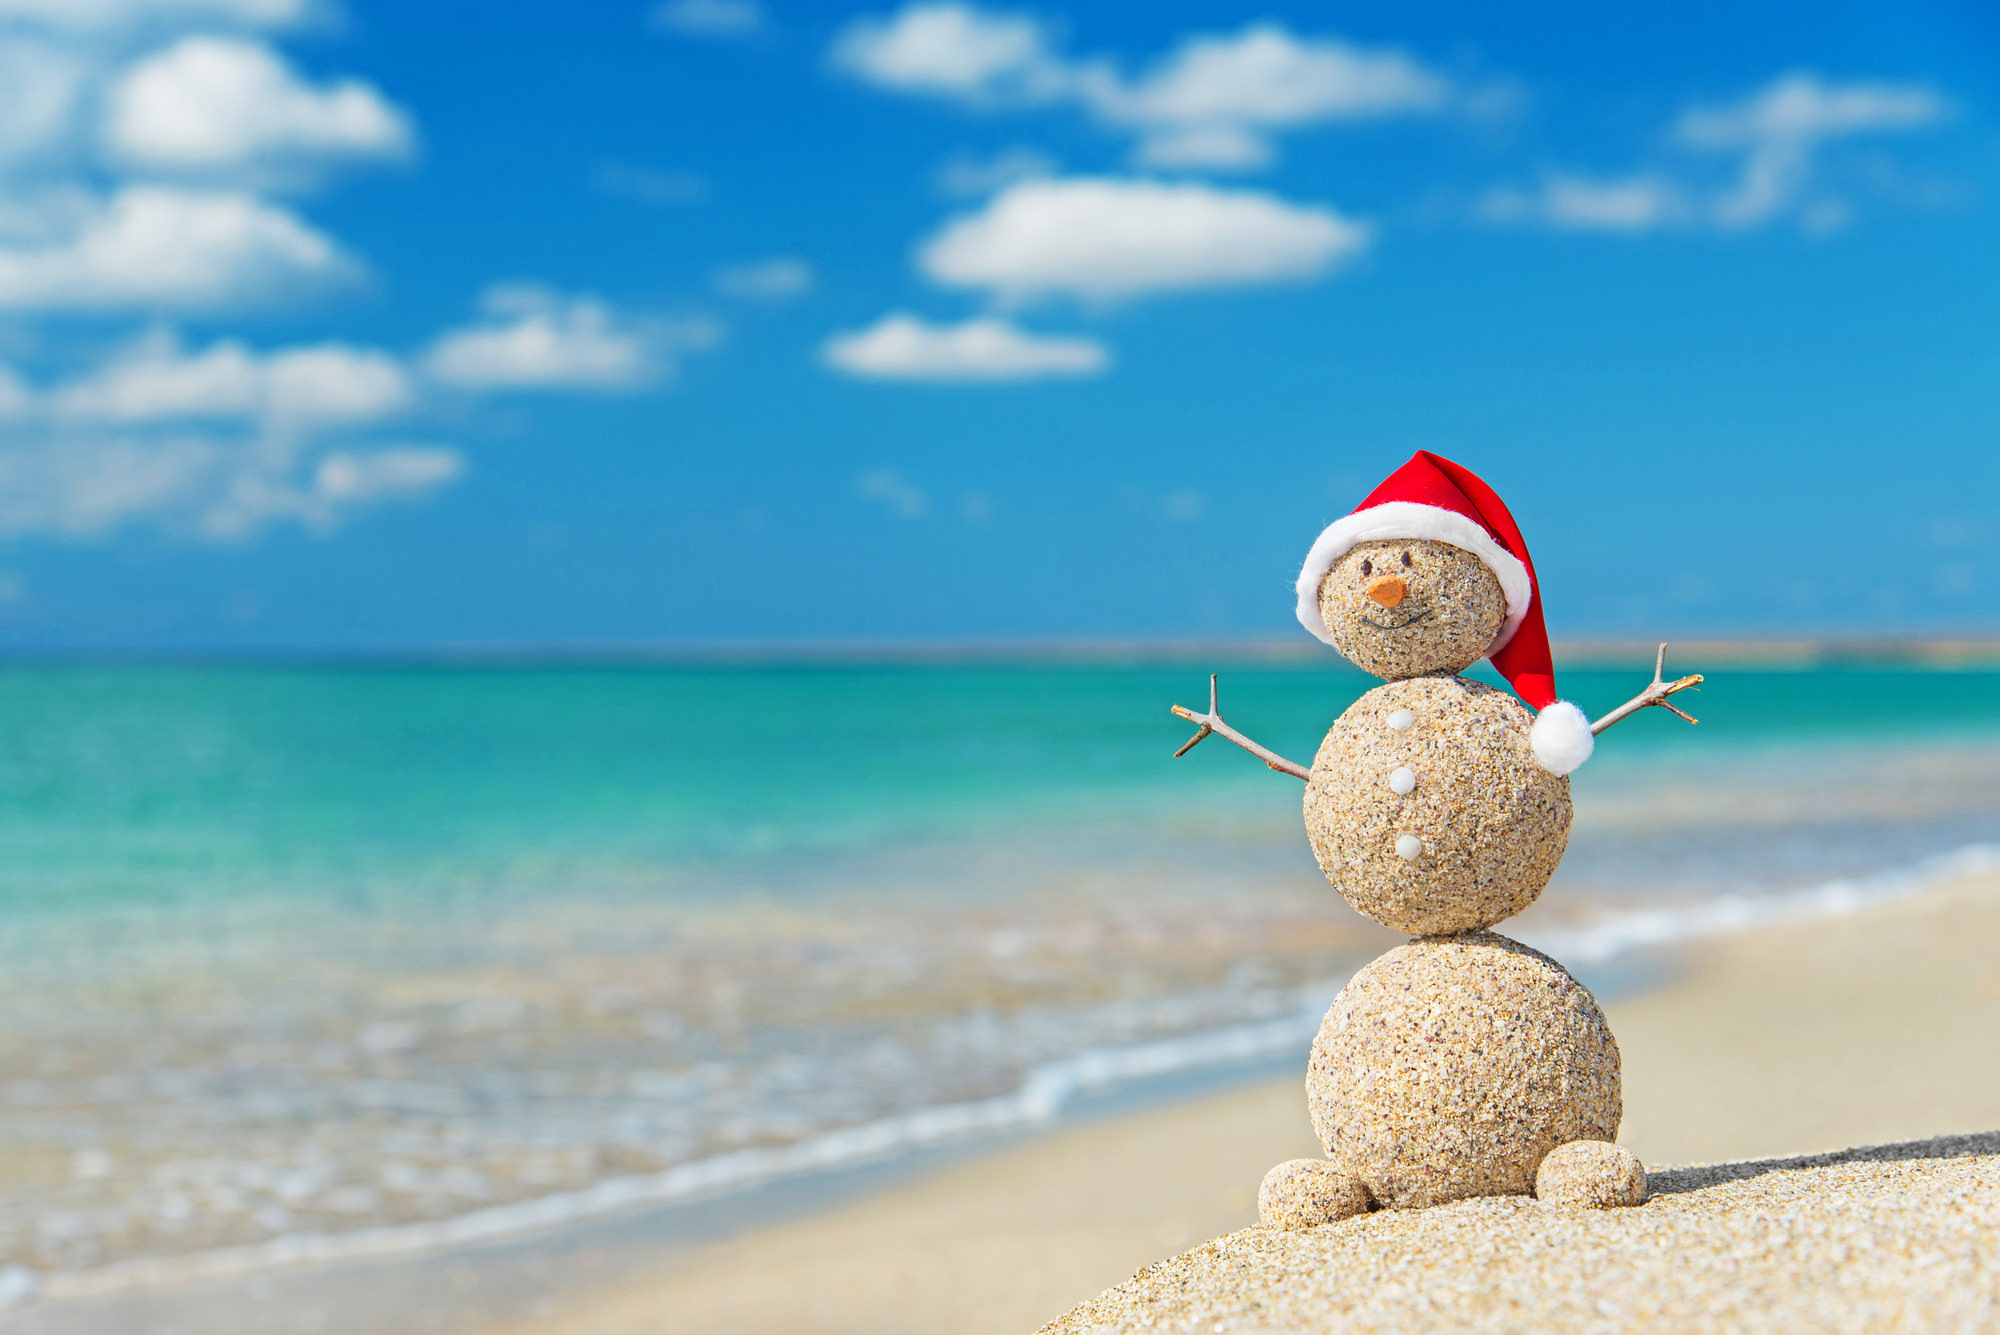 Pensacola Beach for the Holidays: 10 Things You’ll Definitely Want to Do